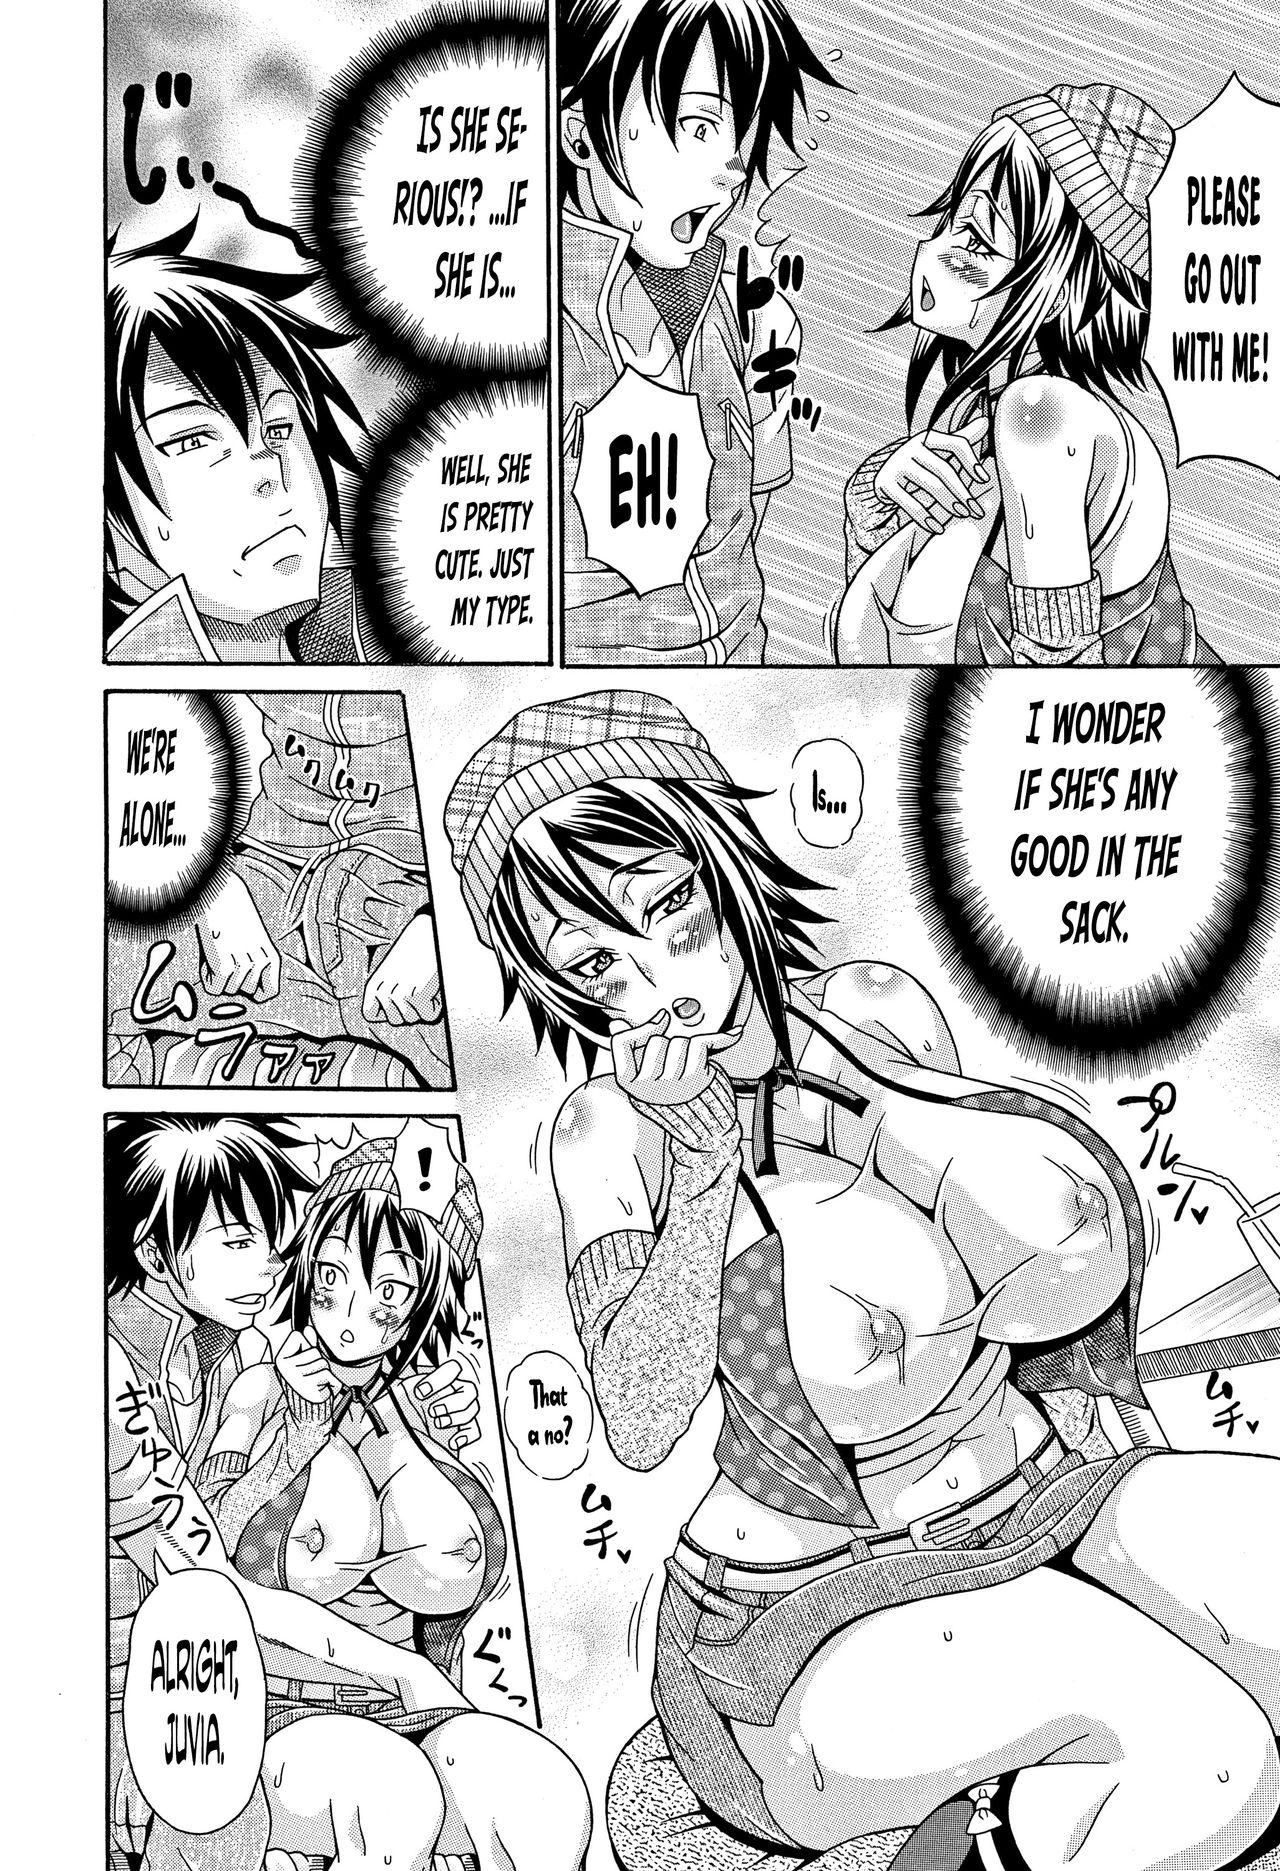 [Andou Hiroyuki] Mamire Chichi - Sticky Tits Feel Hot All Over. Ch.1-11 [English] [doujin-moe.us] 58